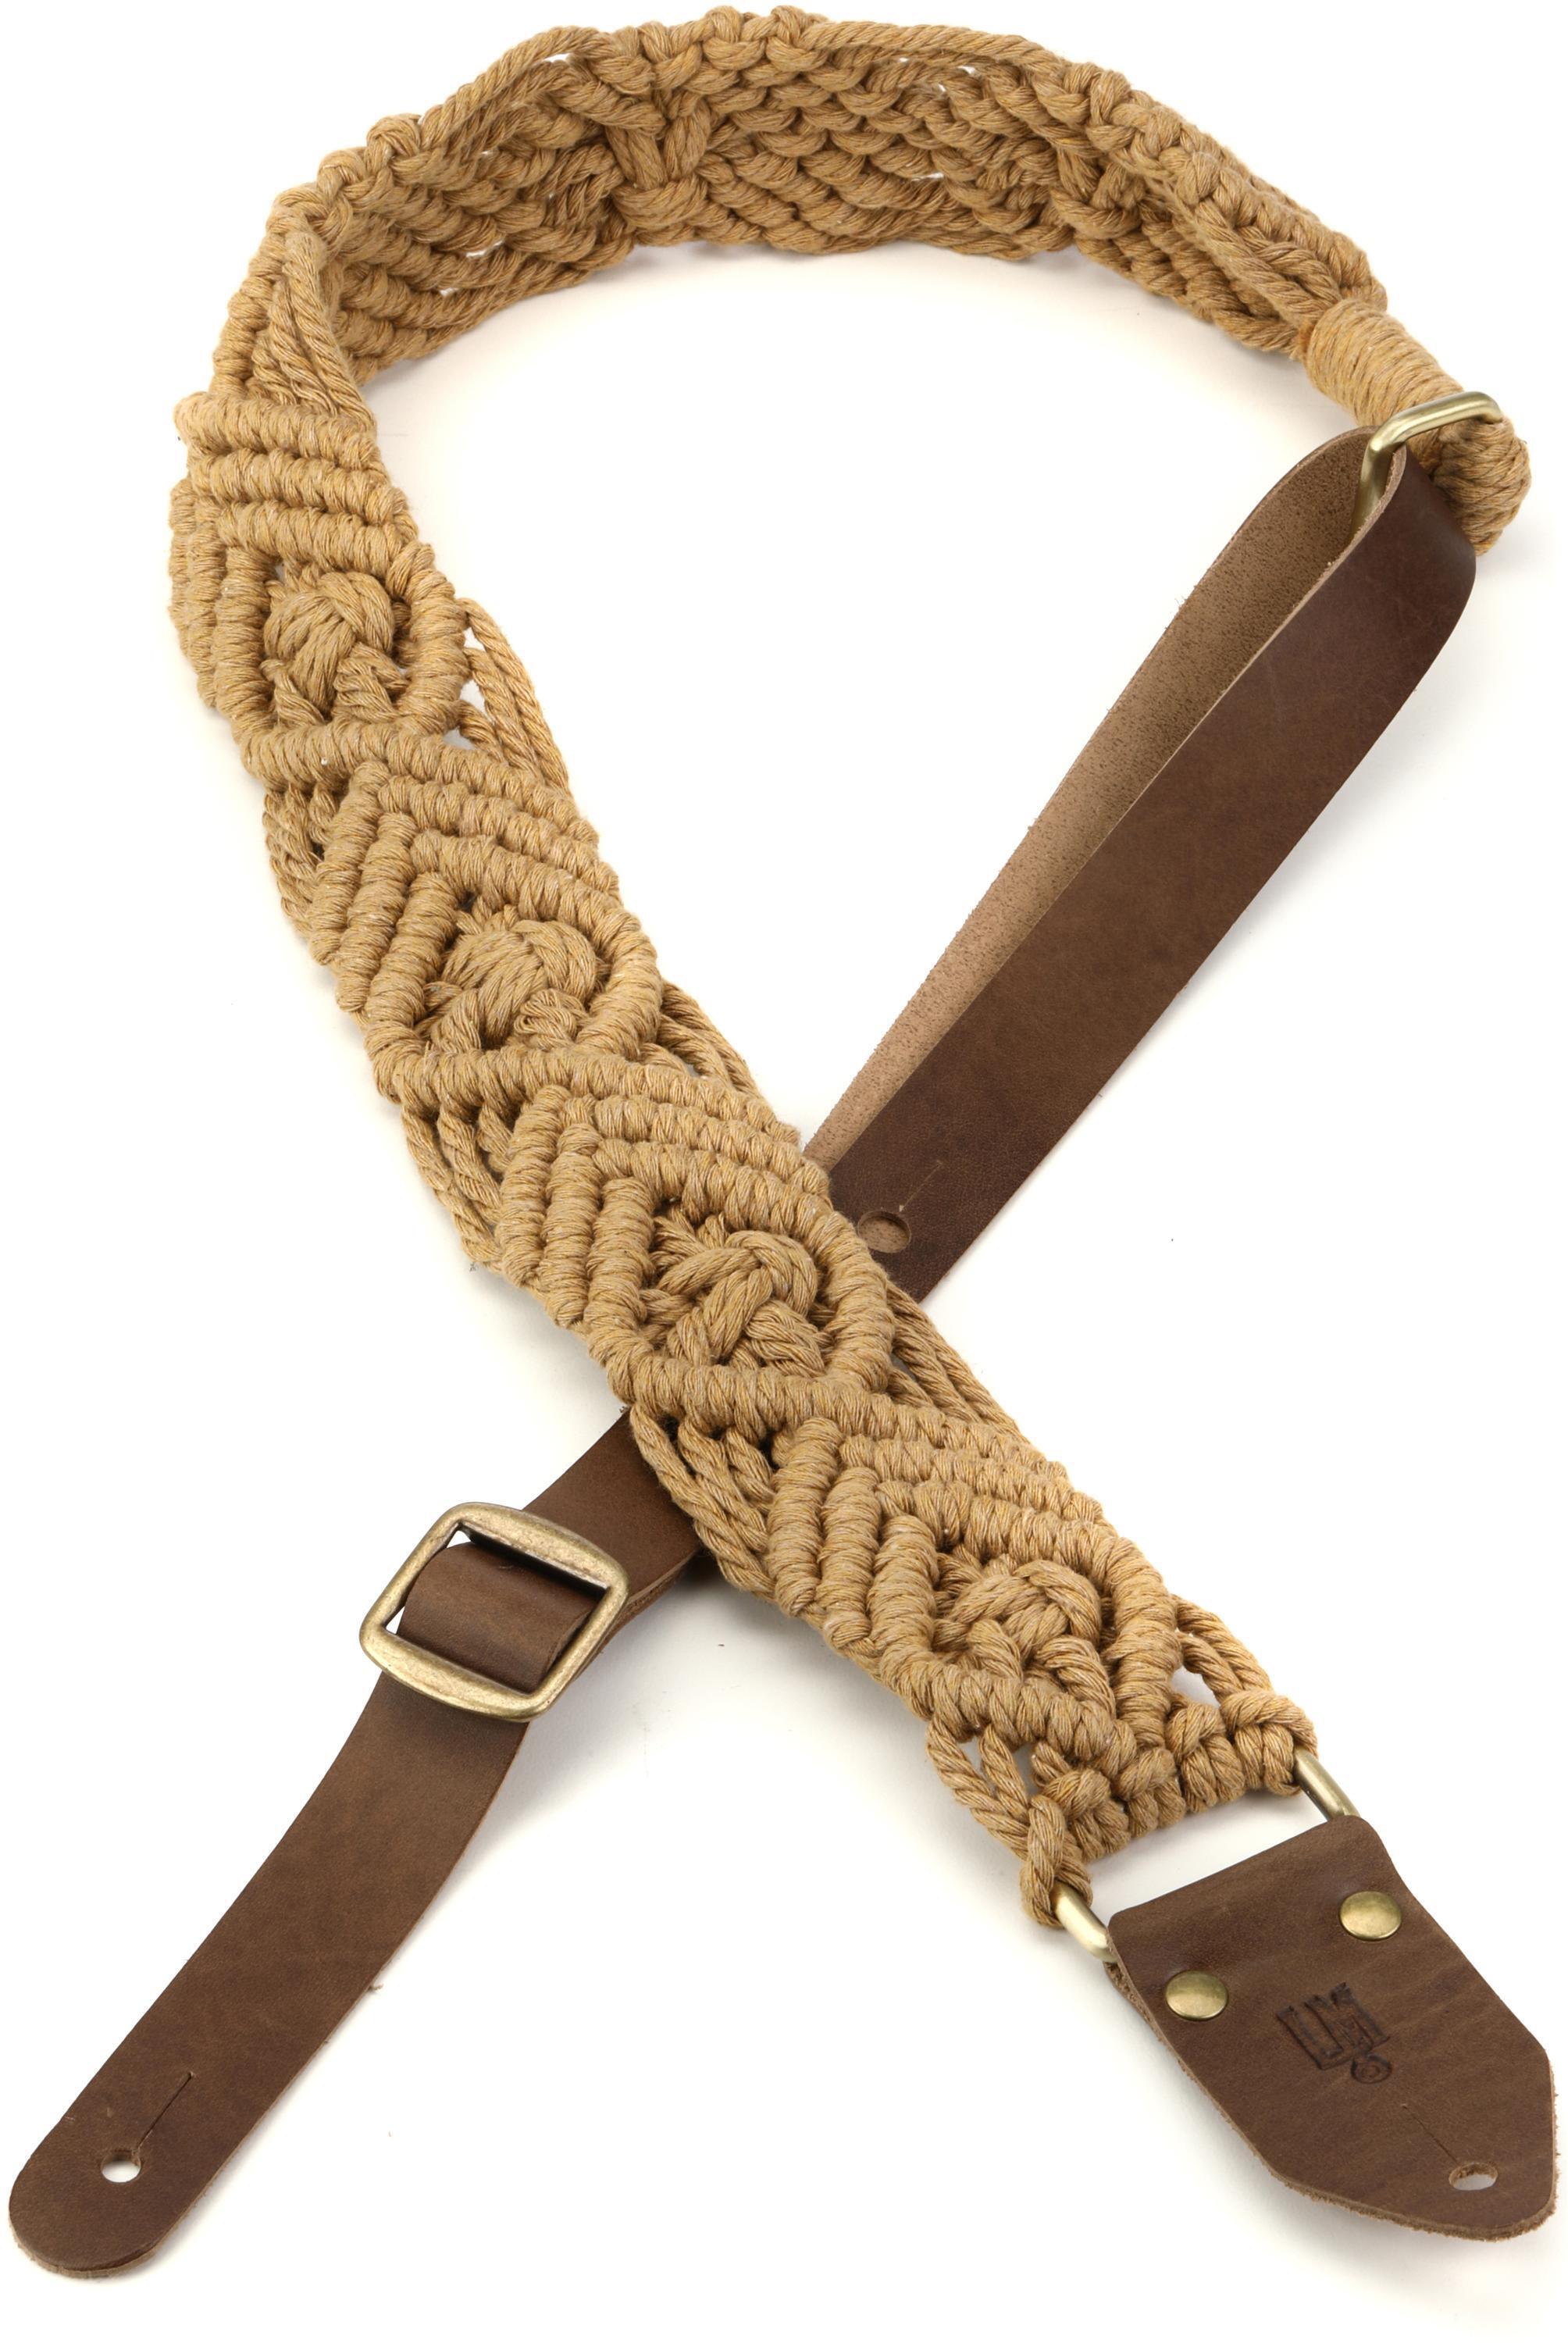 LM Products 2-inch Macrame Cotton Guitar Strap with Leather Ends - Beige